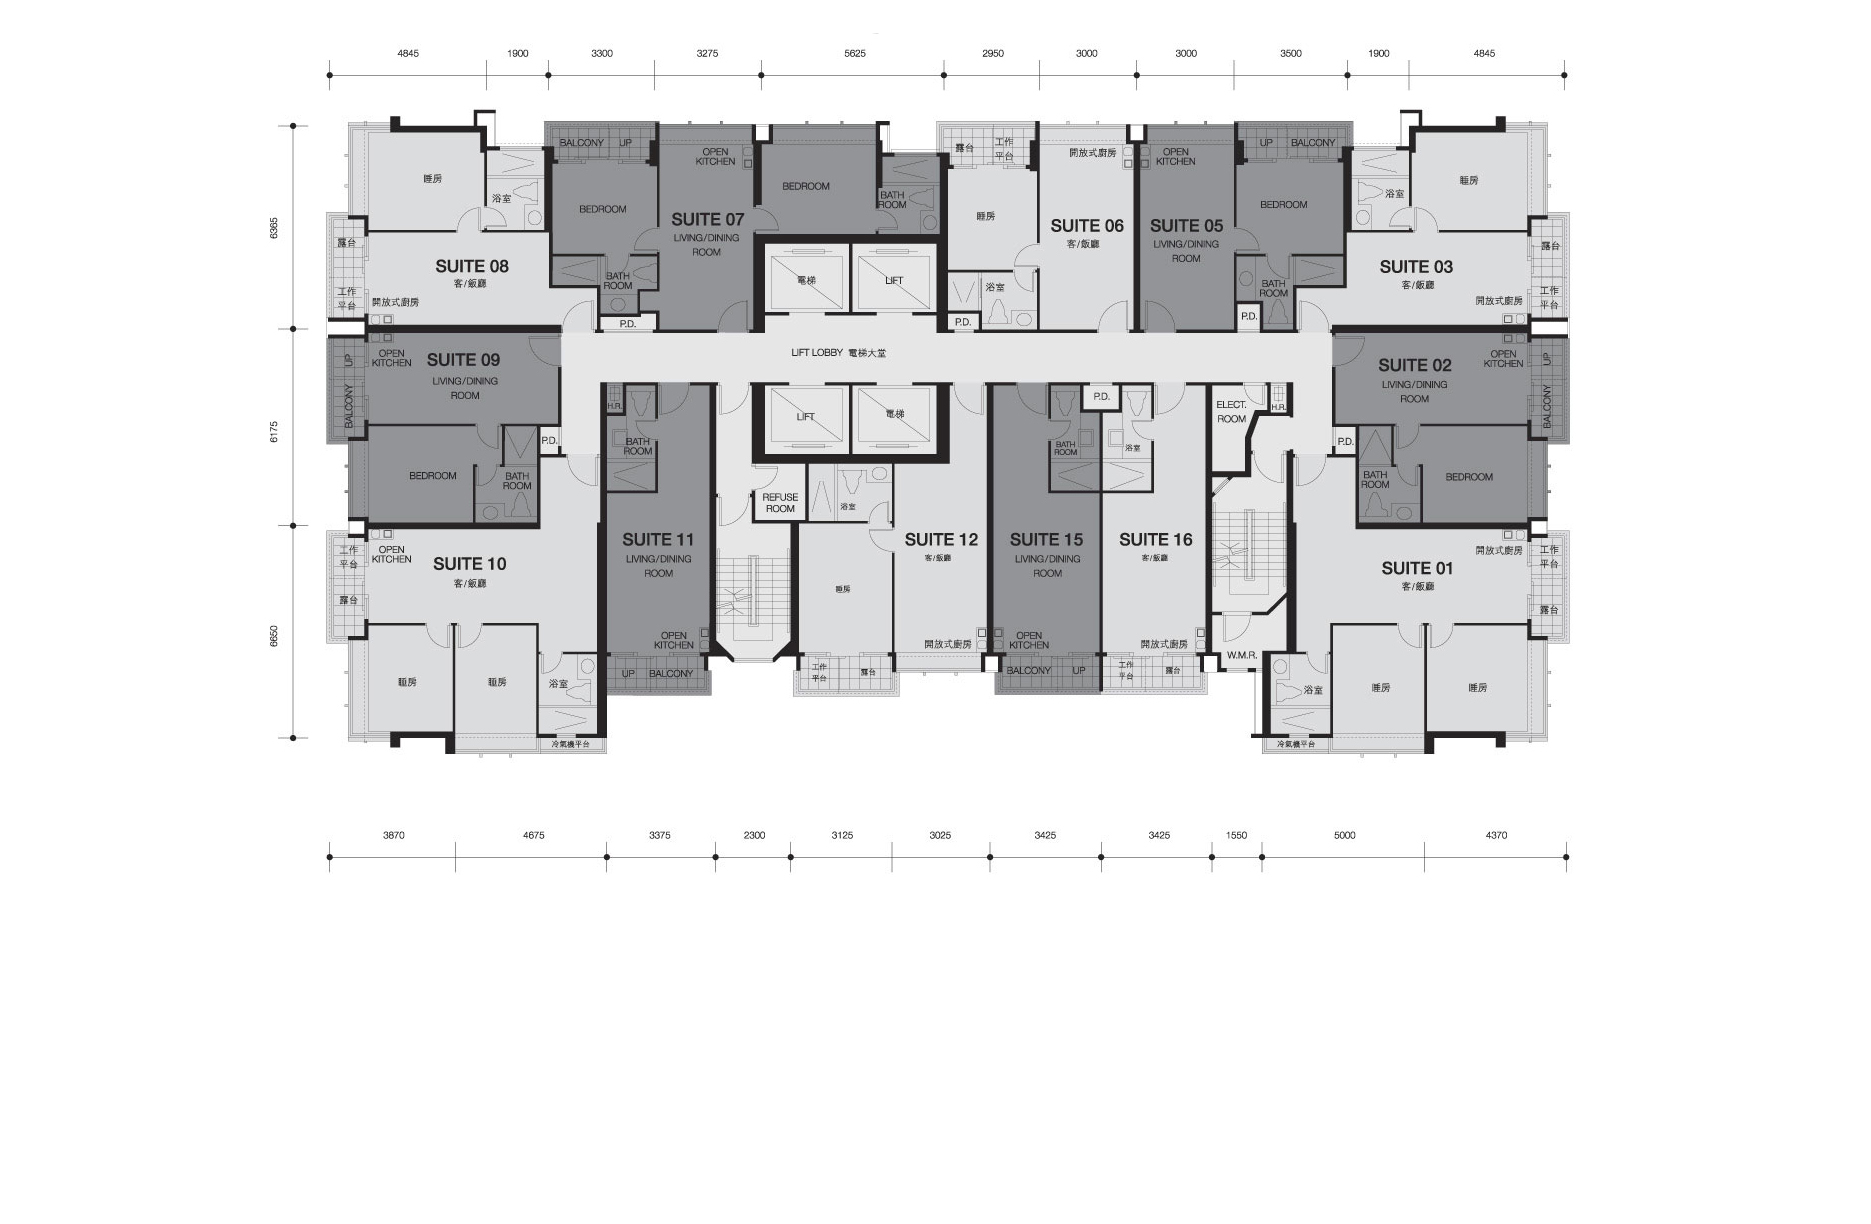 PHOTO: Jutting was found in his apartment on the 31st floor of J Residence, an upscale building in Hong Kong. This is the floorplan for his floor, though it is not known which exact apartment he lived in.